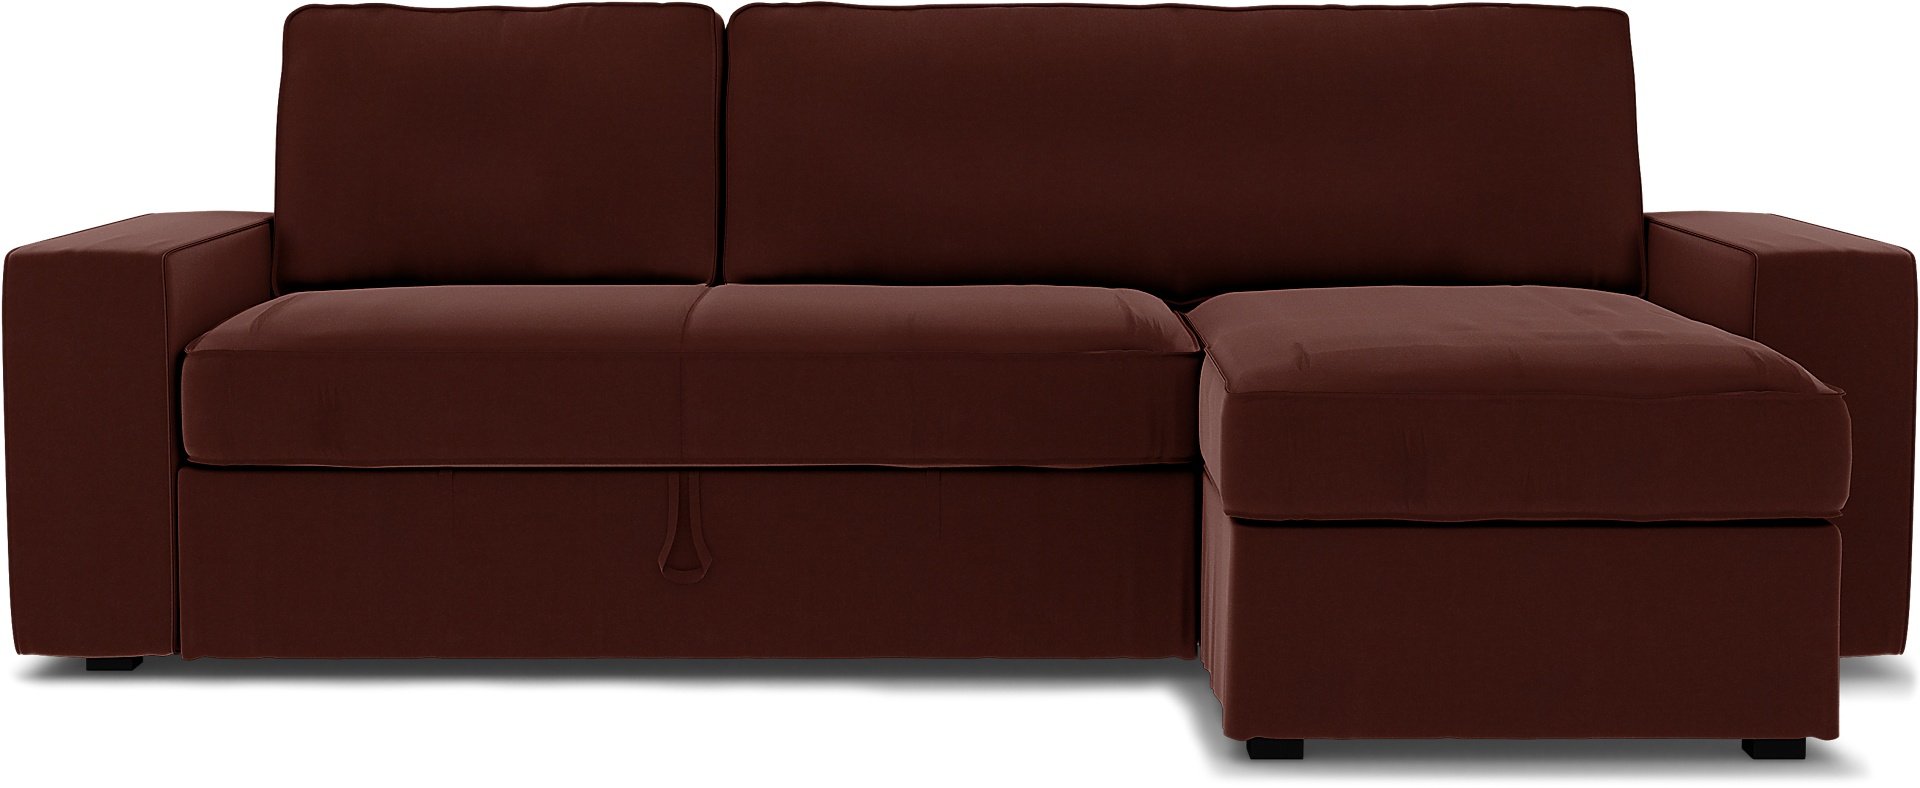 IKEA - Vilasund sofa bed with chaise cover, Ground Coffee, Velvet - Bemz